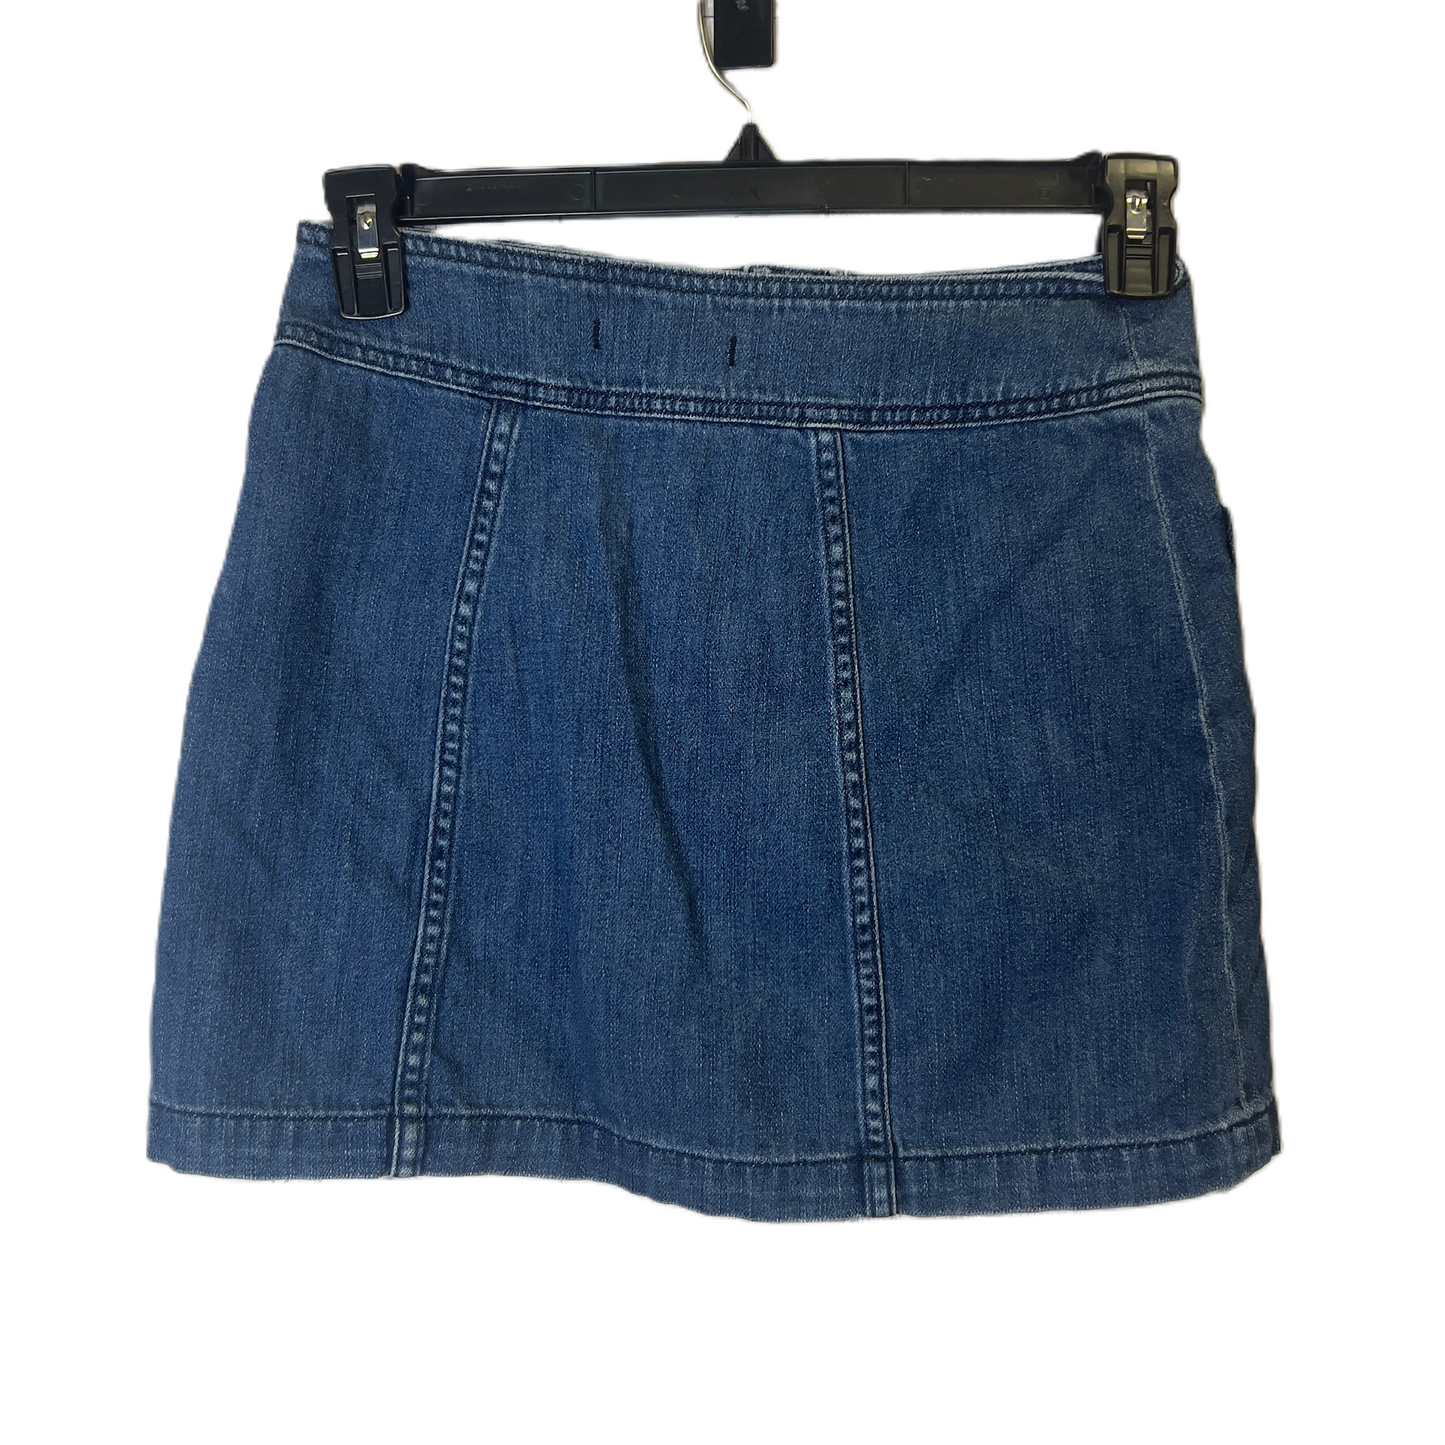 Blue Skirt Mini & Short By Free People, Size: 2